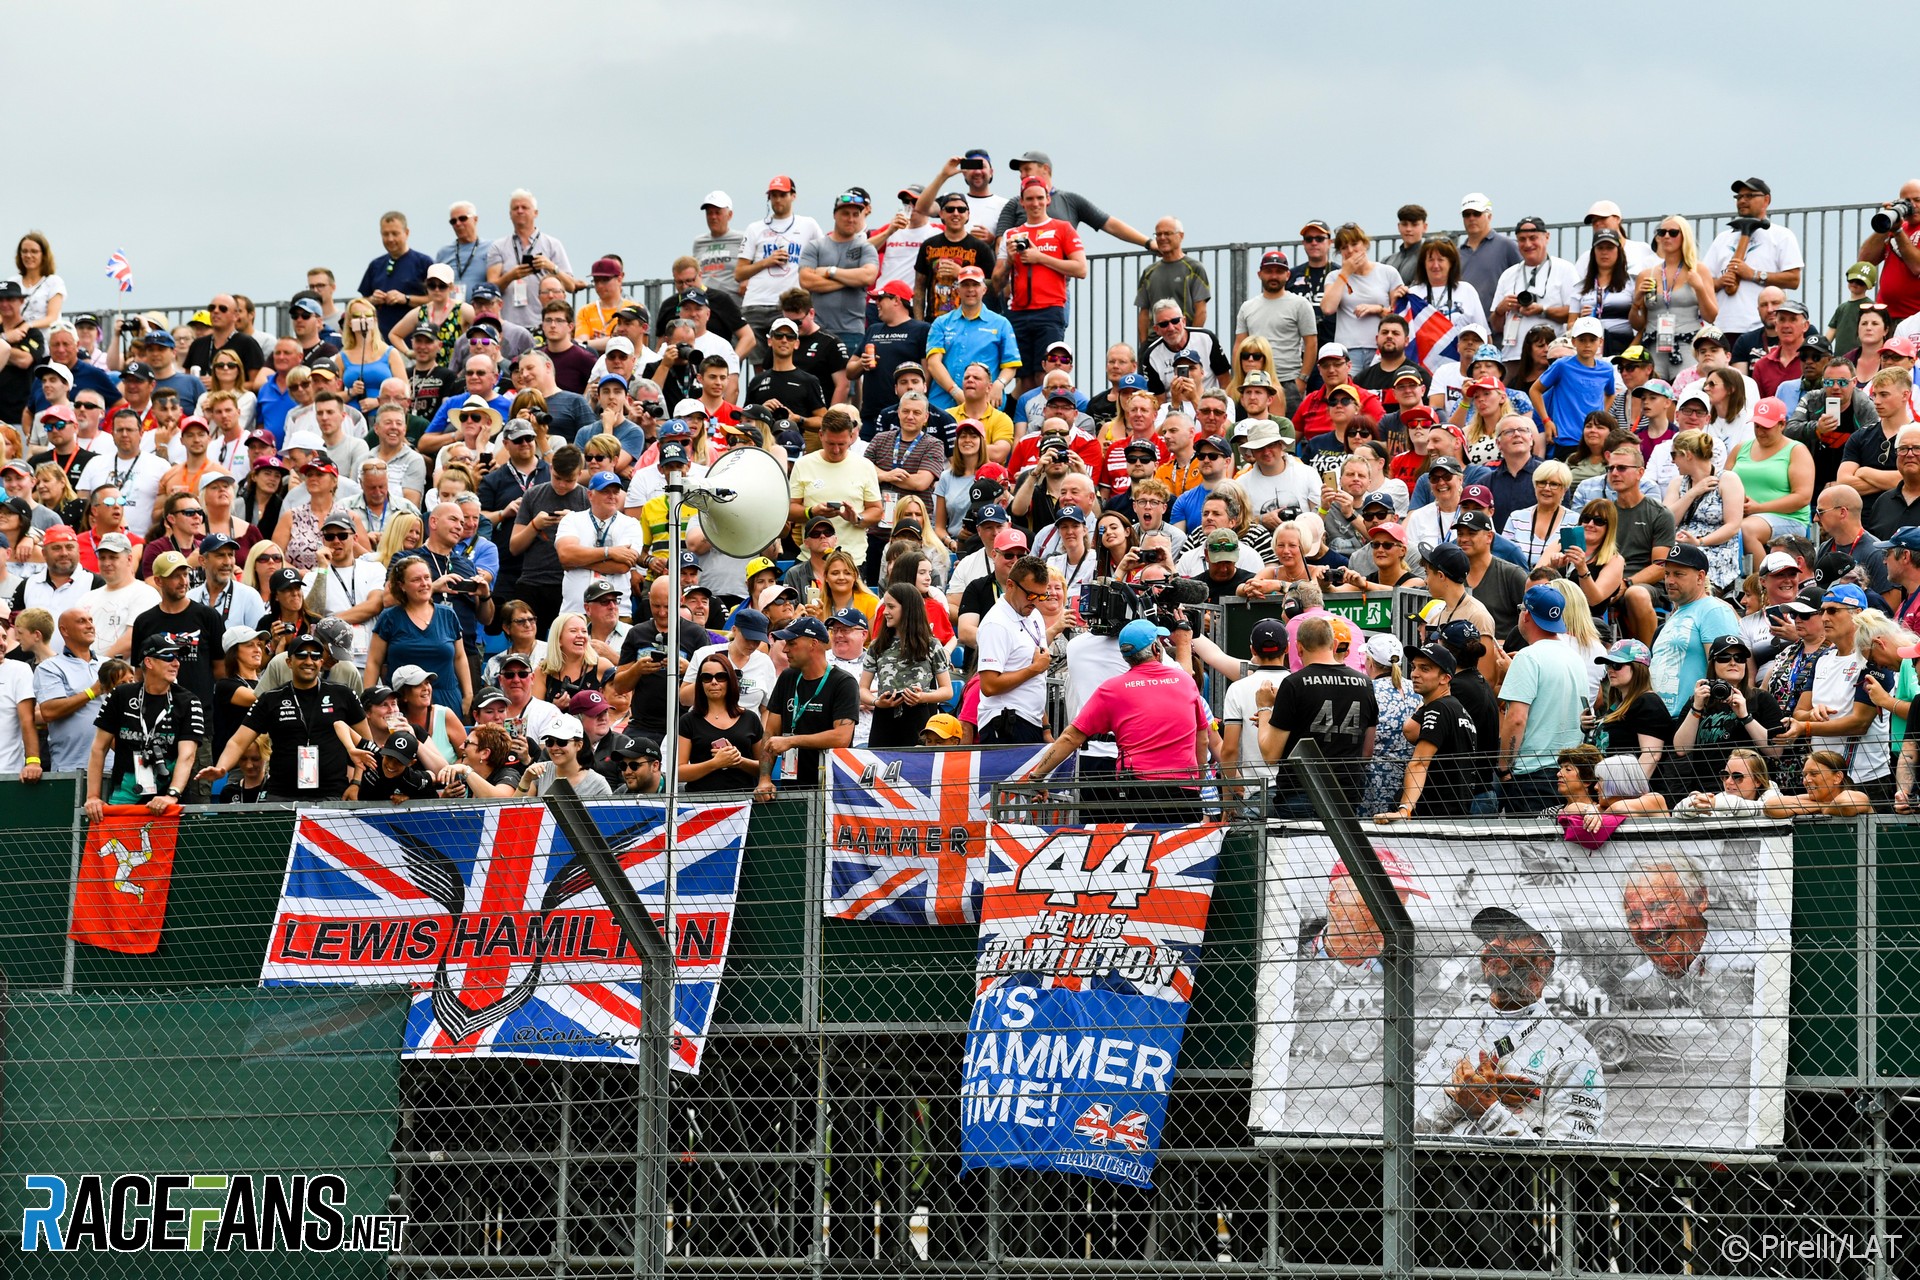 More F1 venues following Silverstone’s lead in aim for full crowds